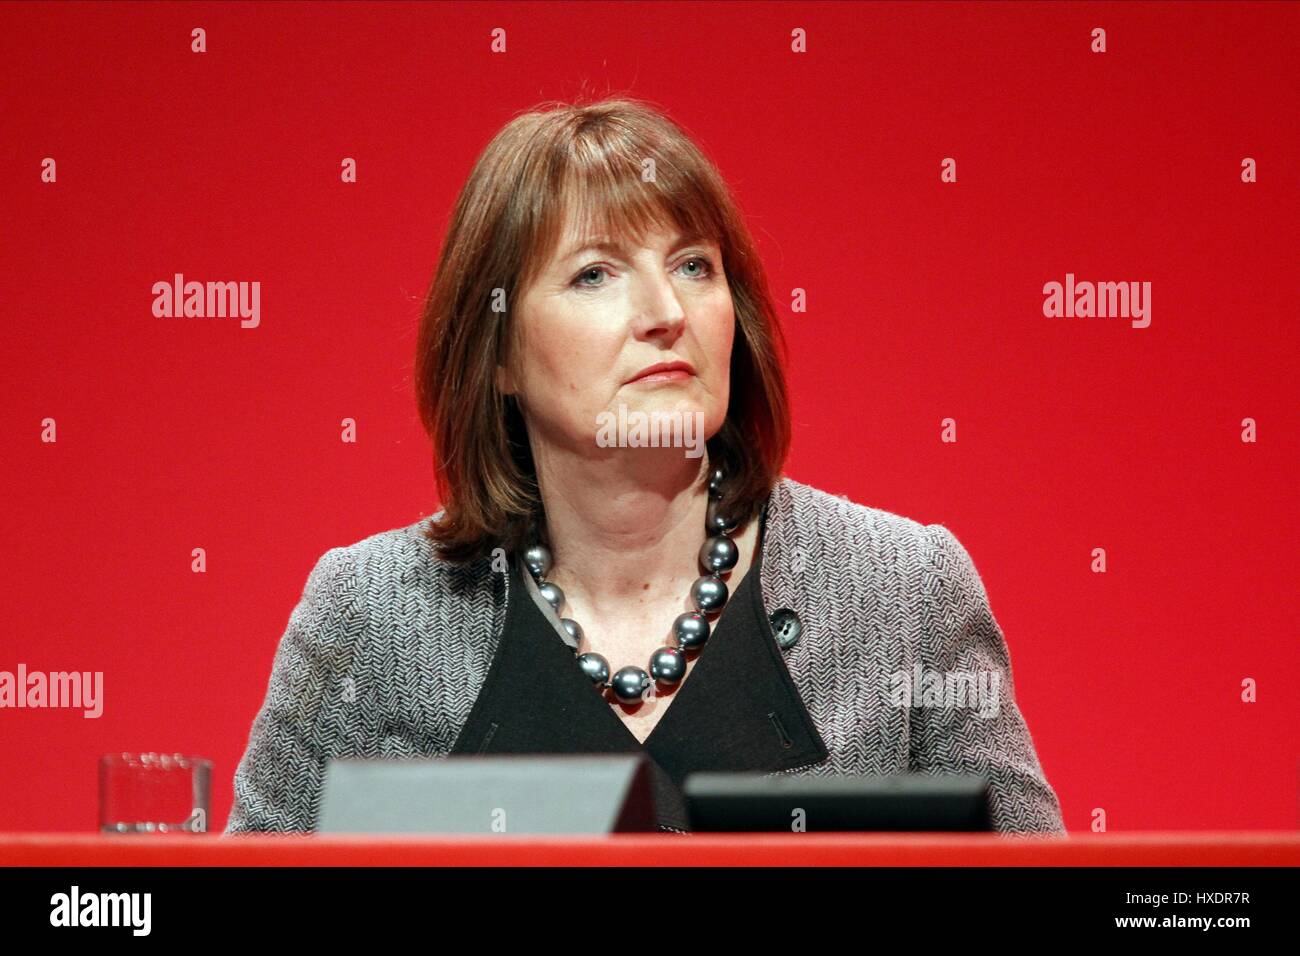 HARRIET HARMAN ADDRESSES THE LABOUR PARTY CON 26 September 2010 MANCHESTER CENTRAL MANCHESTER ENGLAND Stock Photo